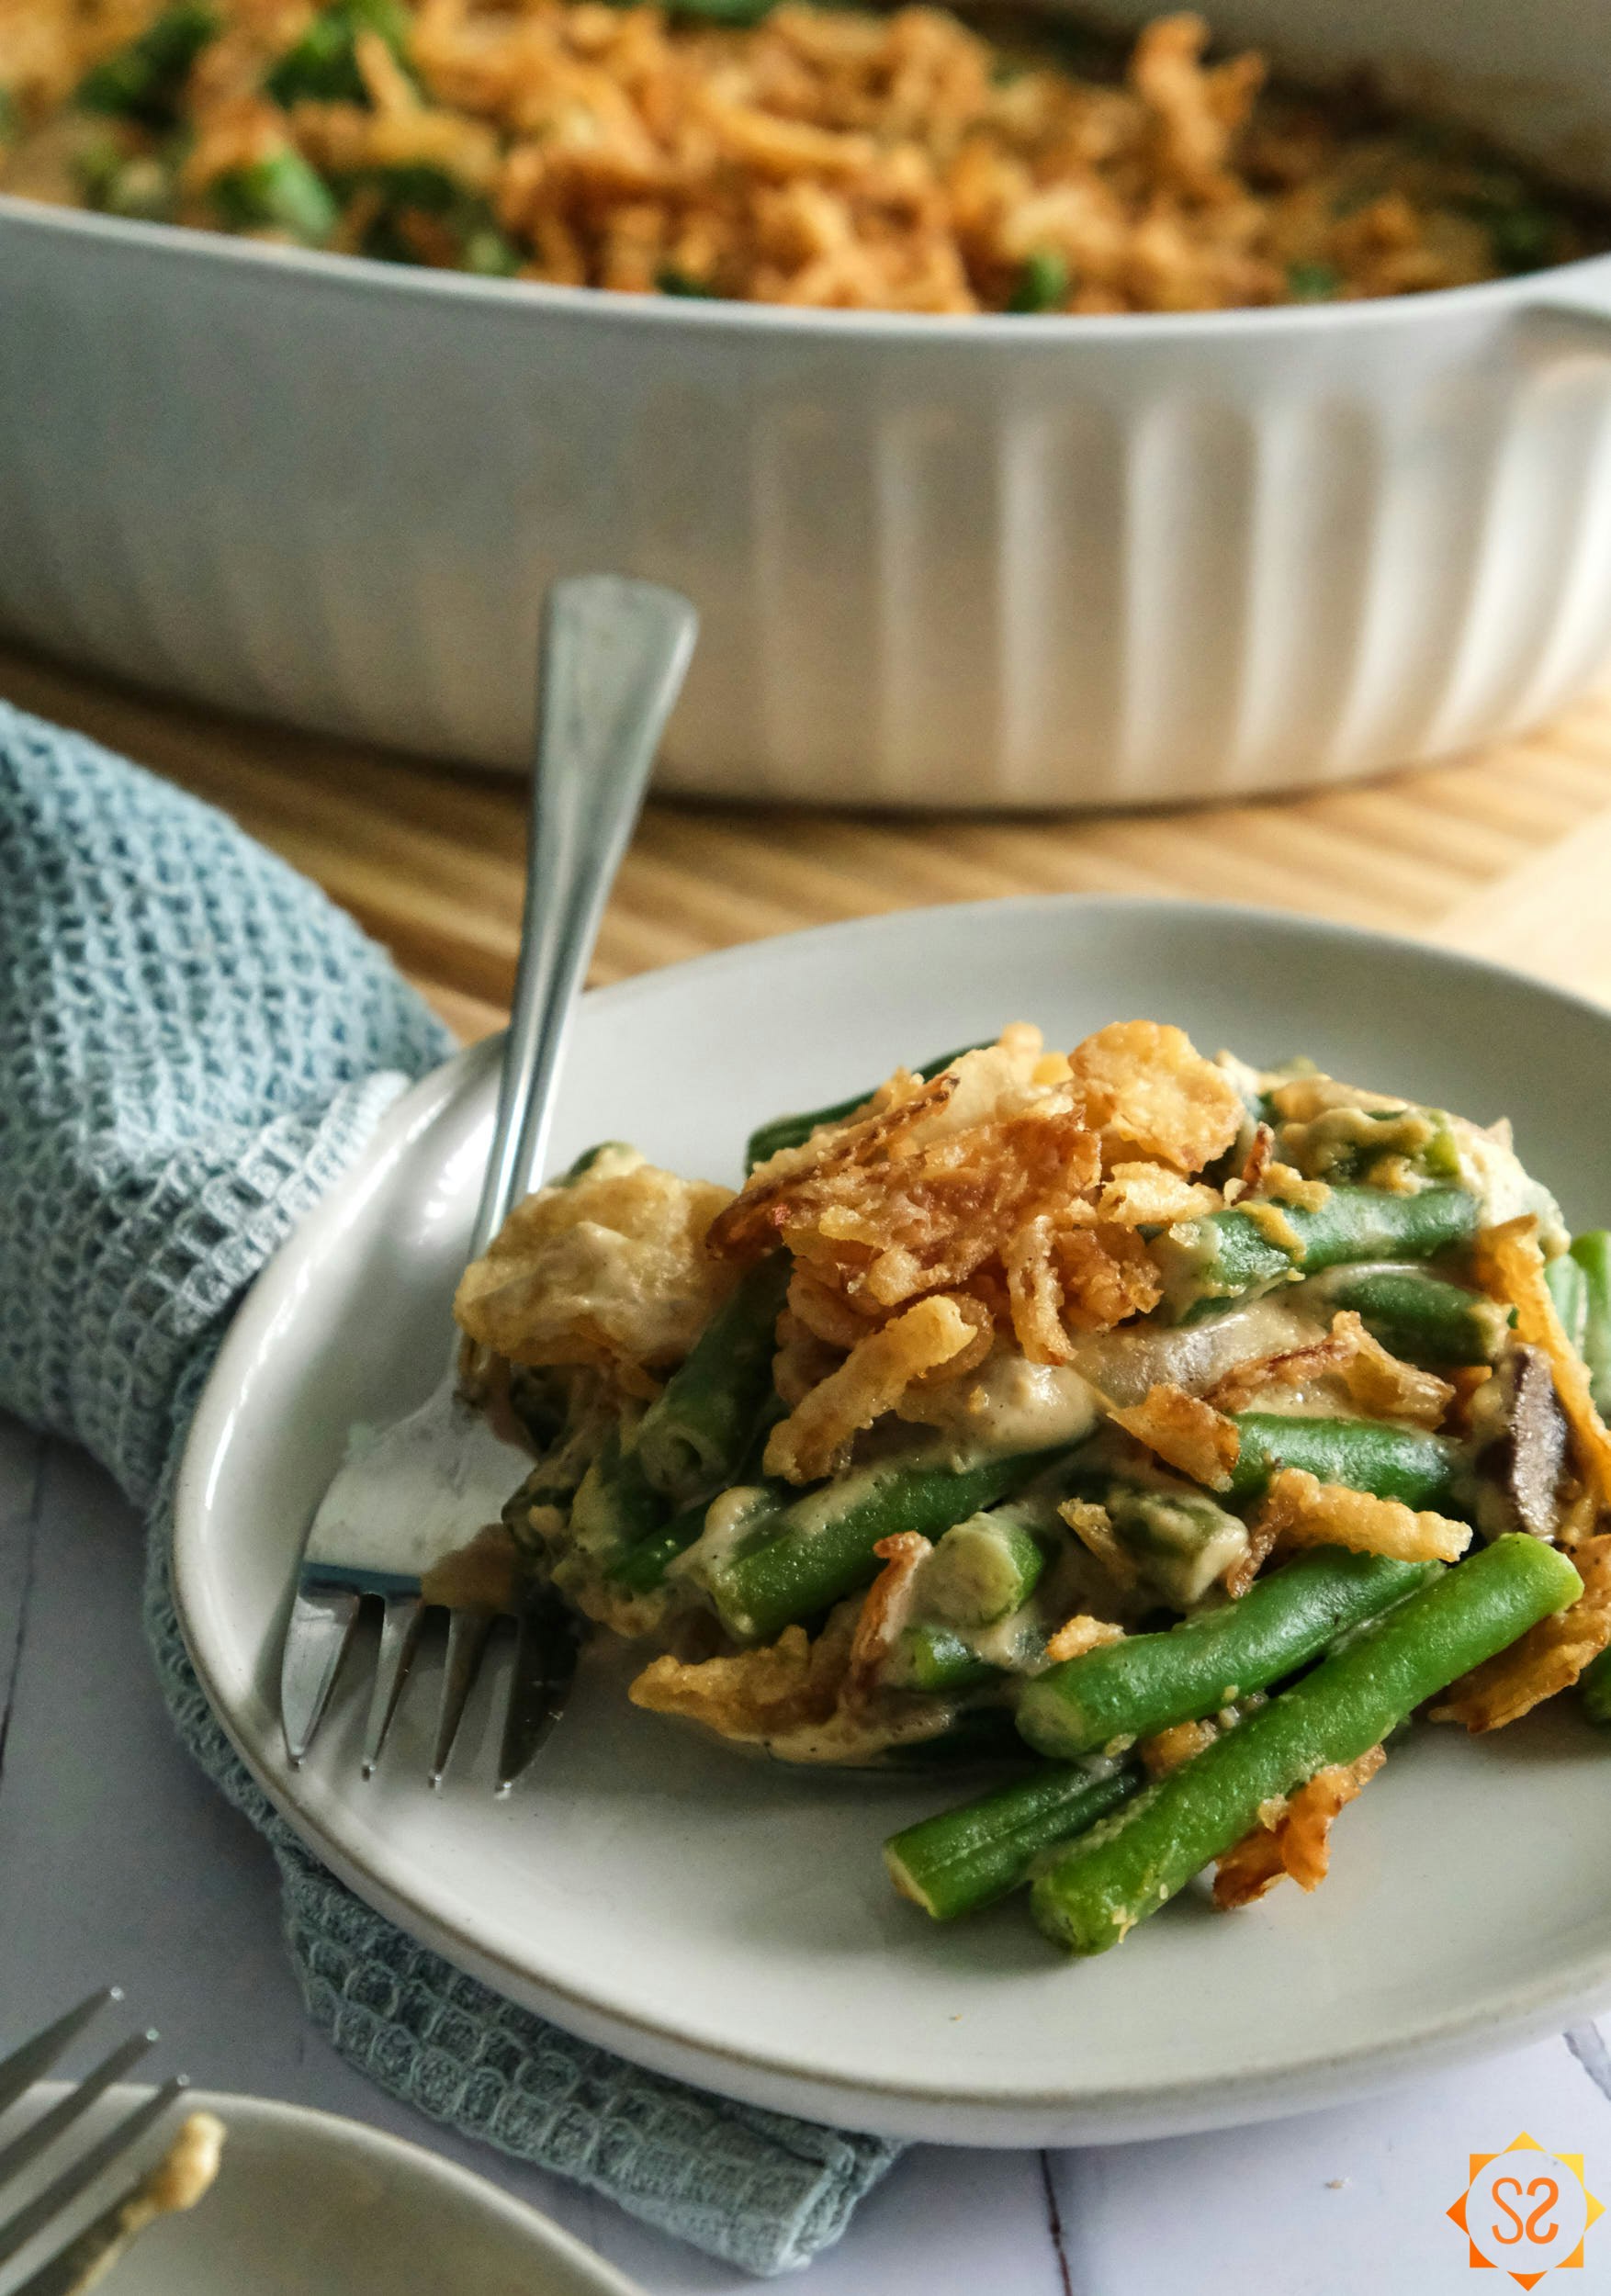 A serving of vegan green bean casserole on a plate, with the whole casserole behind it.